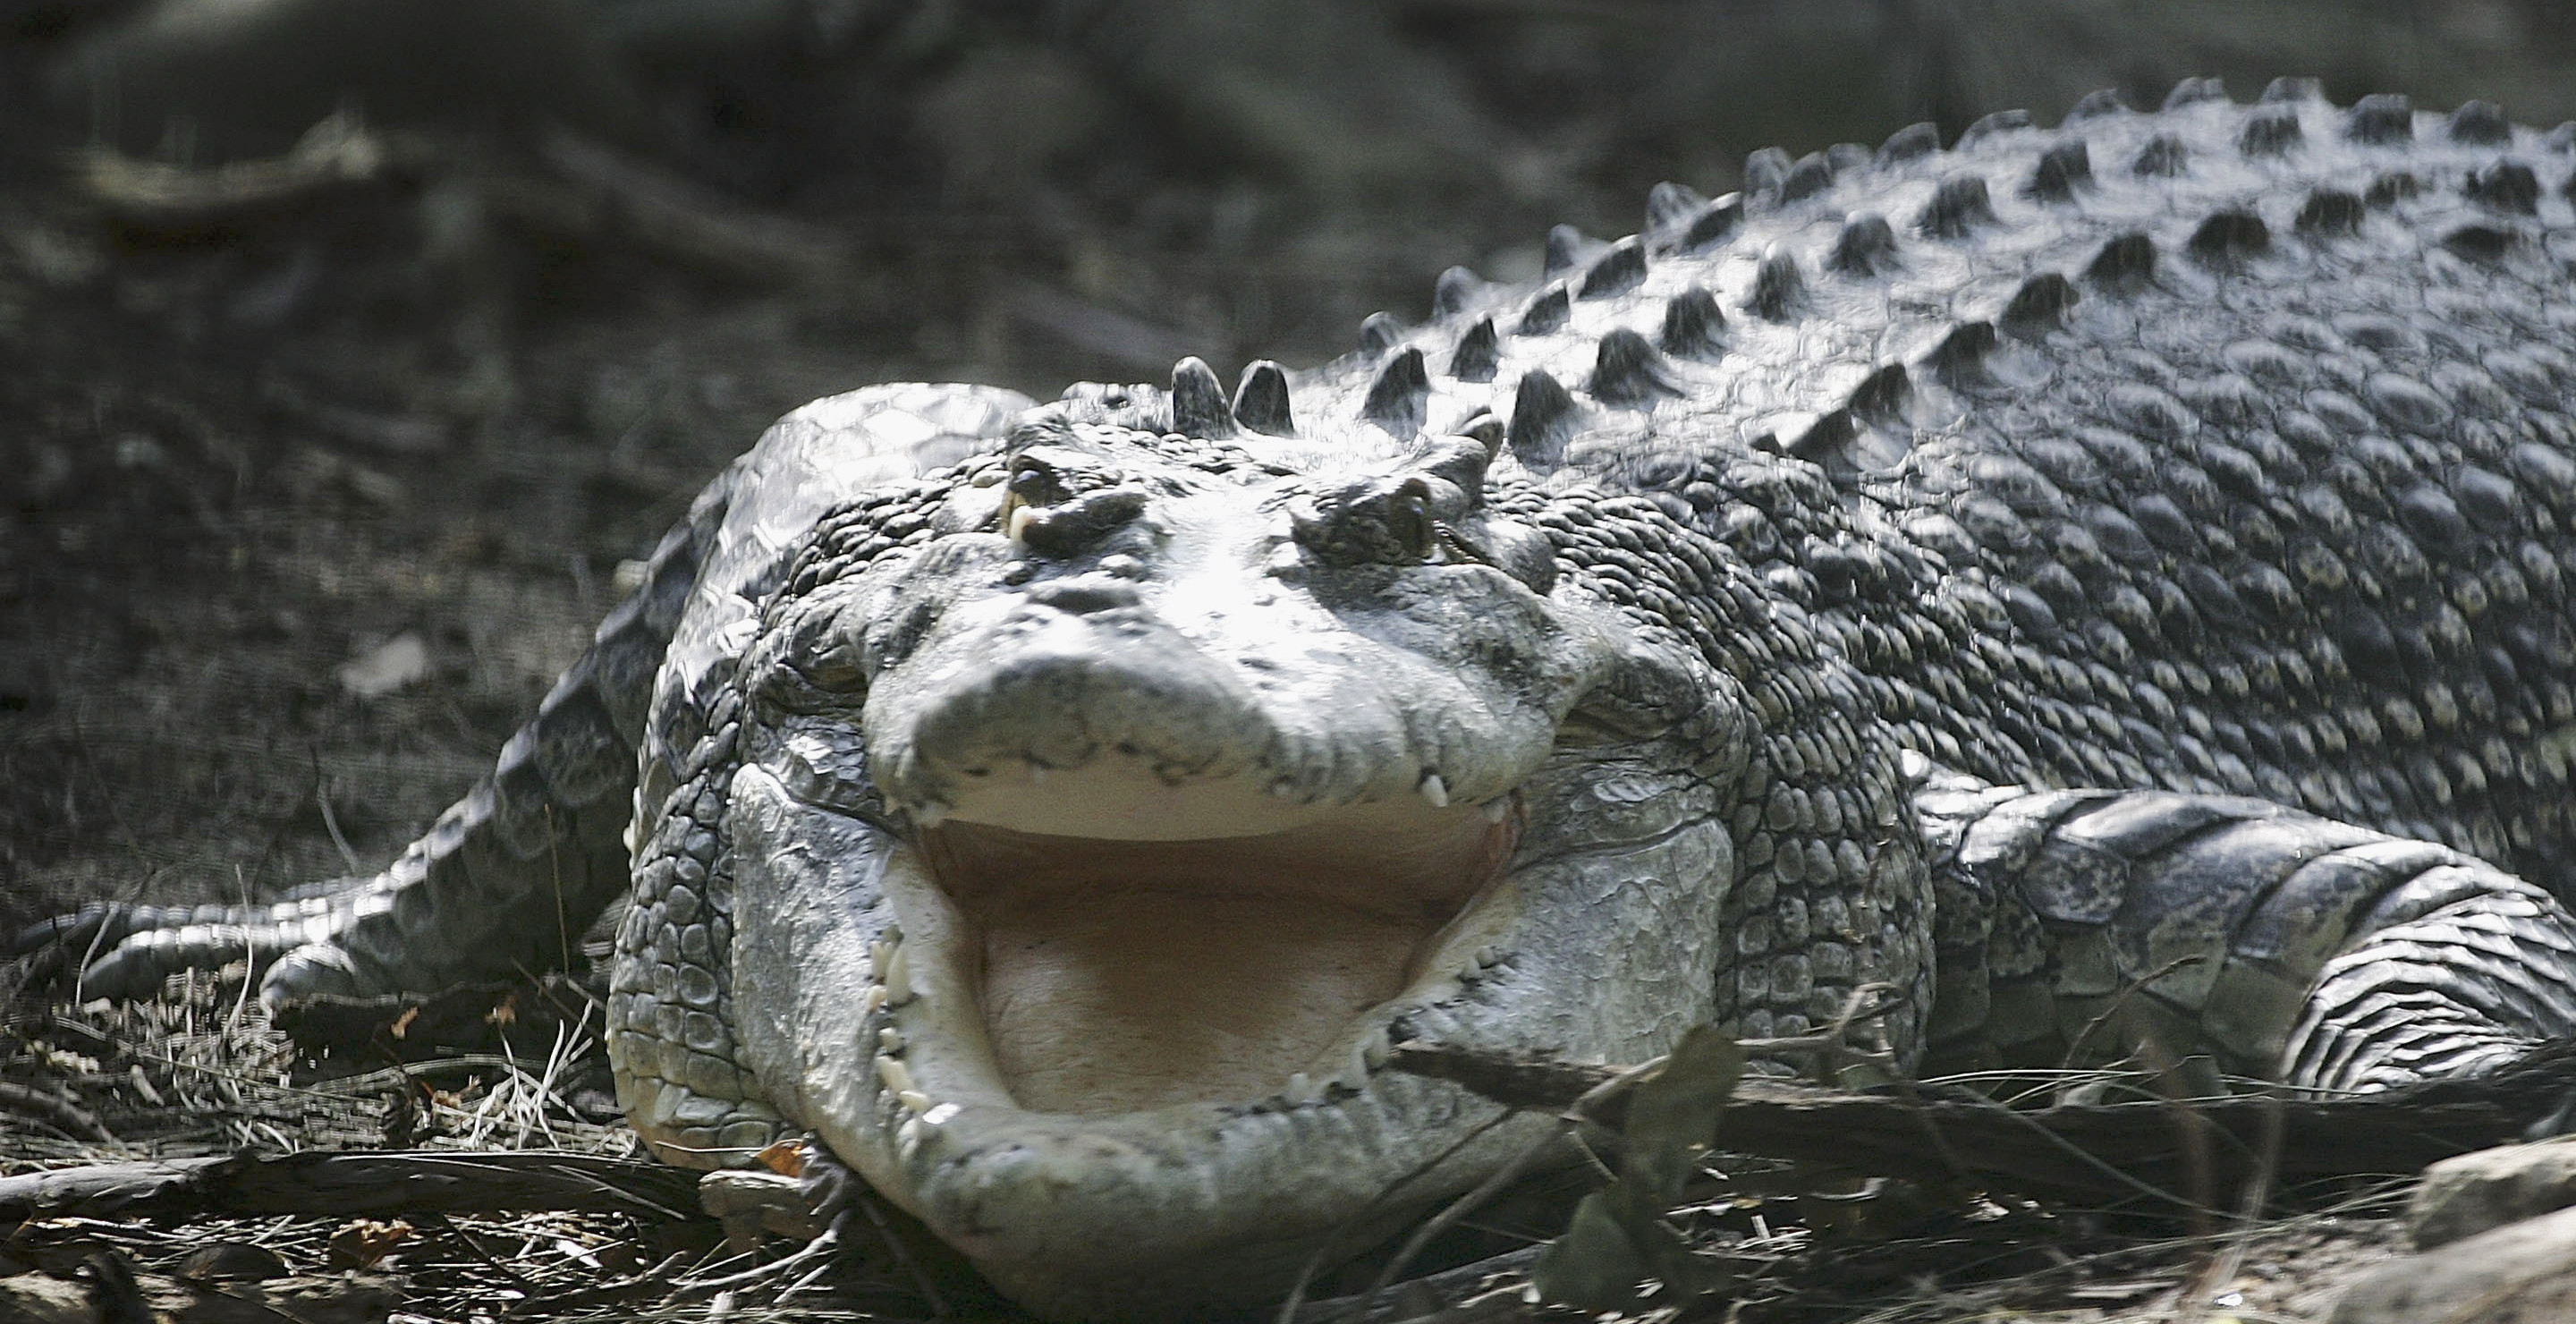 12-Year-Old Girl Missing After Being Attacked by Crocodile